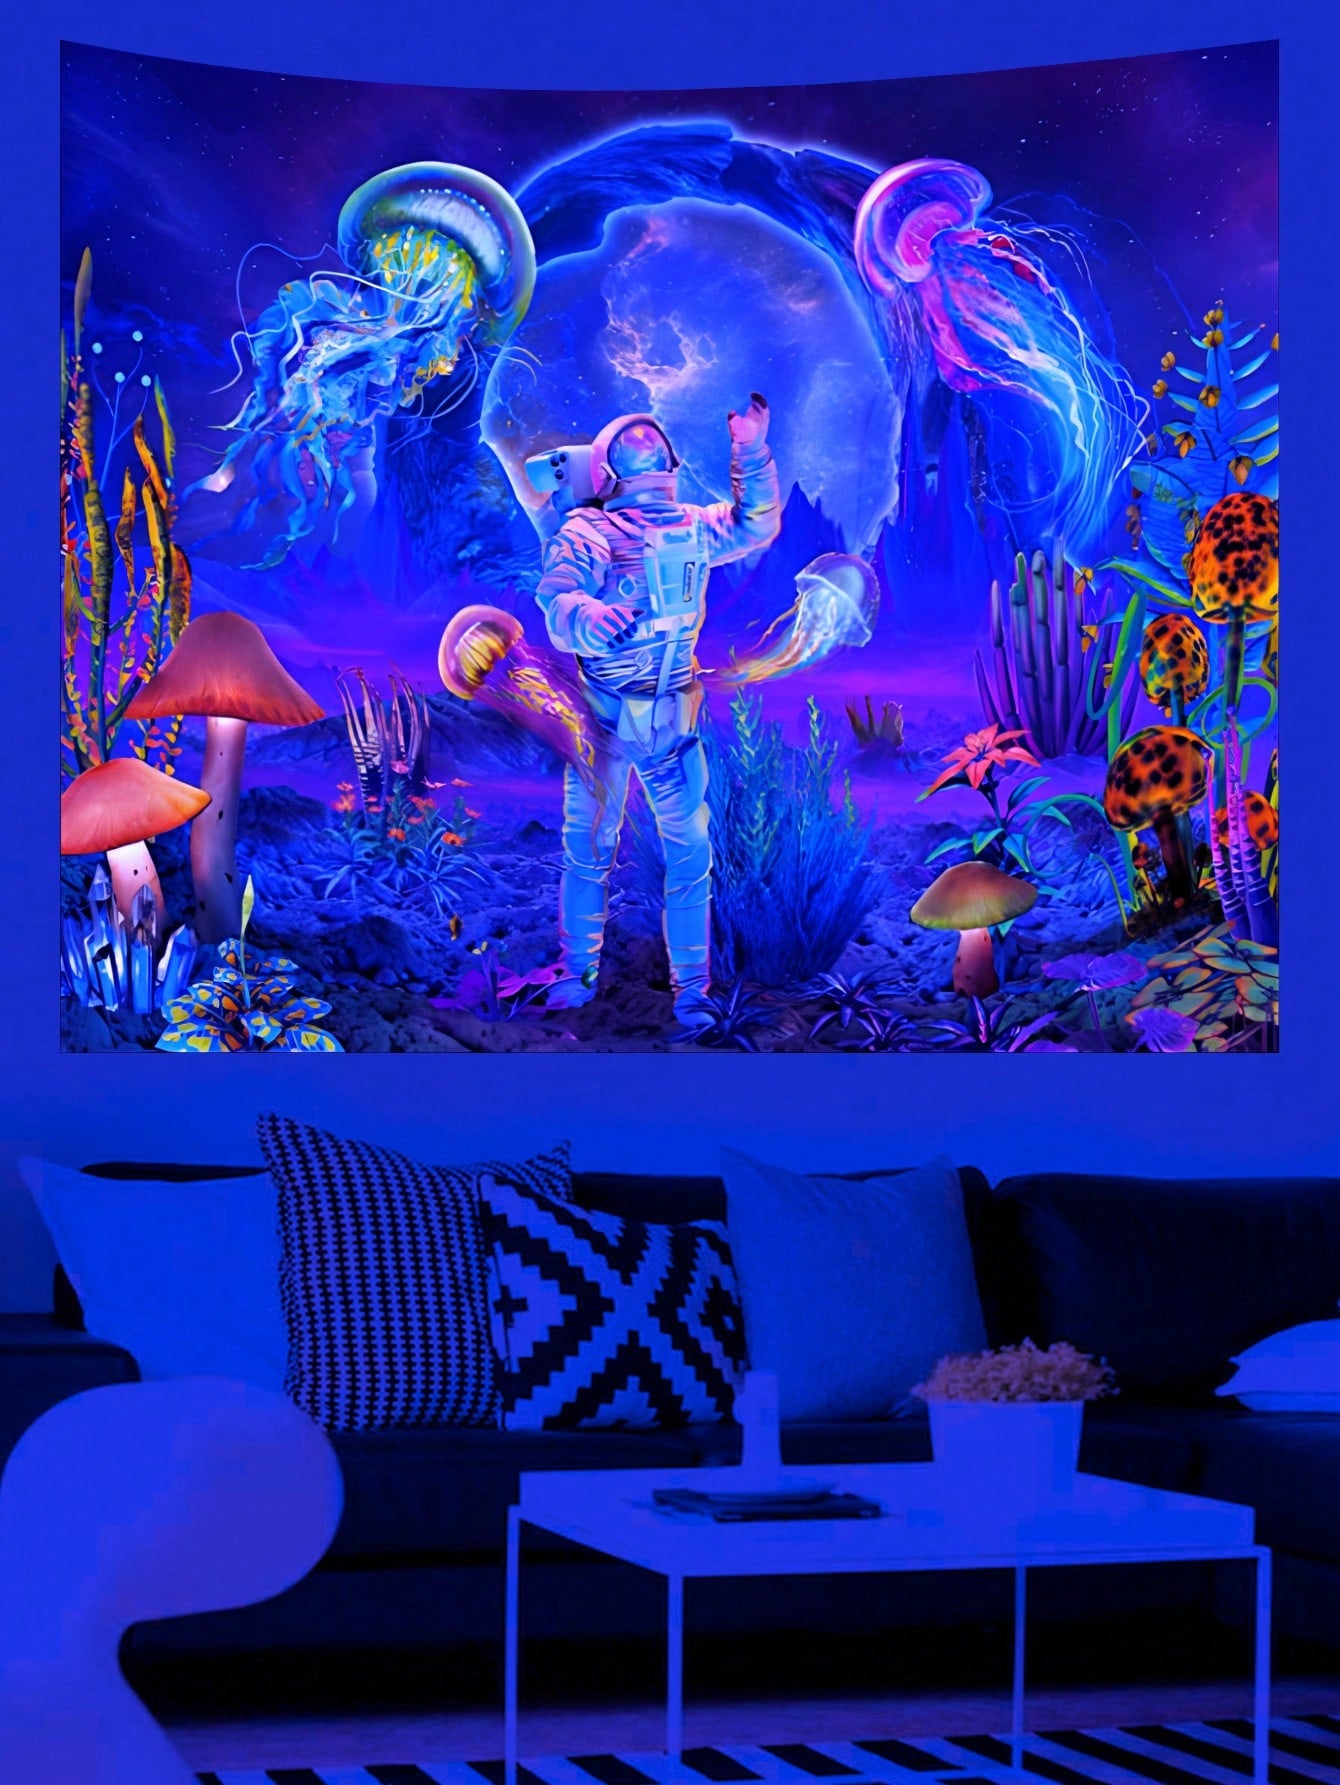 1pc Astronaut Jellyfish & Mushroom Design Uv Reactive Tapestry, Creative Multipurpose Polyester Wall Hanging, Perfect For Home Decoration, Free Installation Kit, Easy To Hang